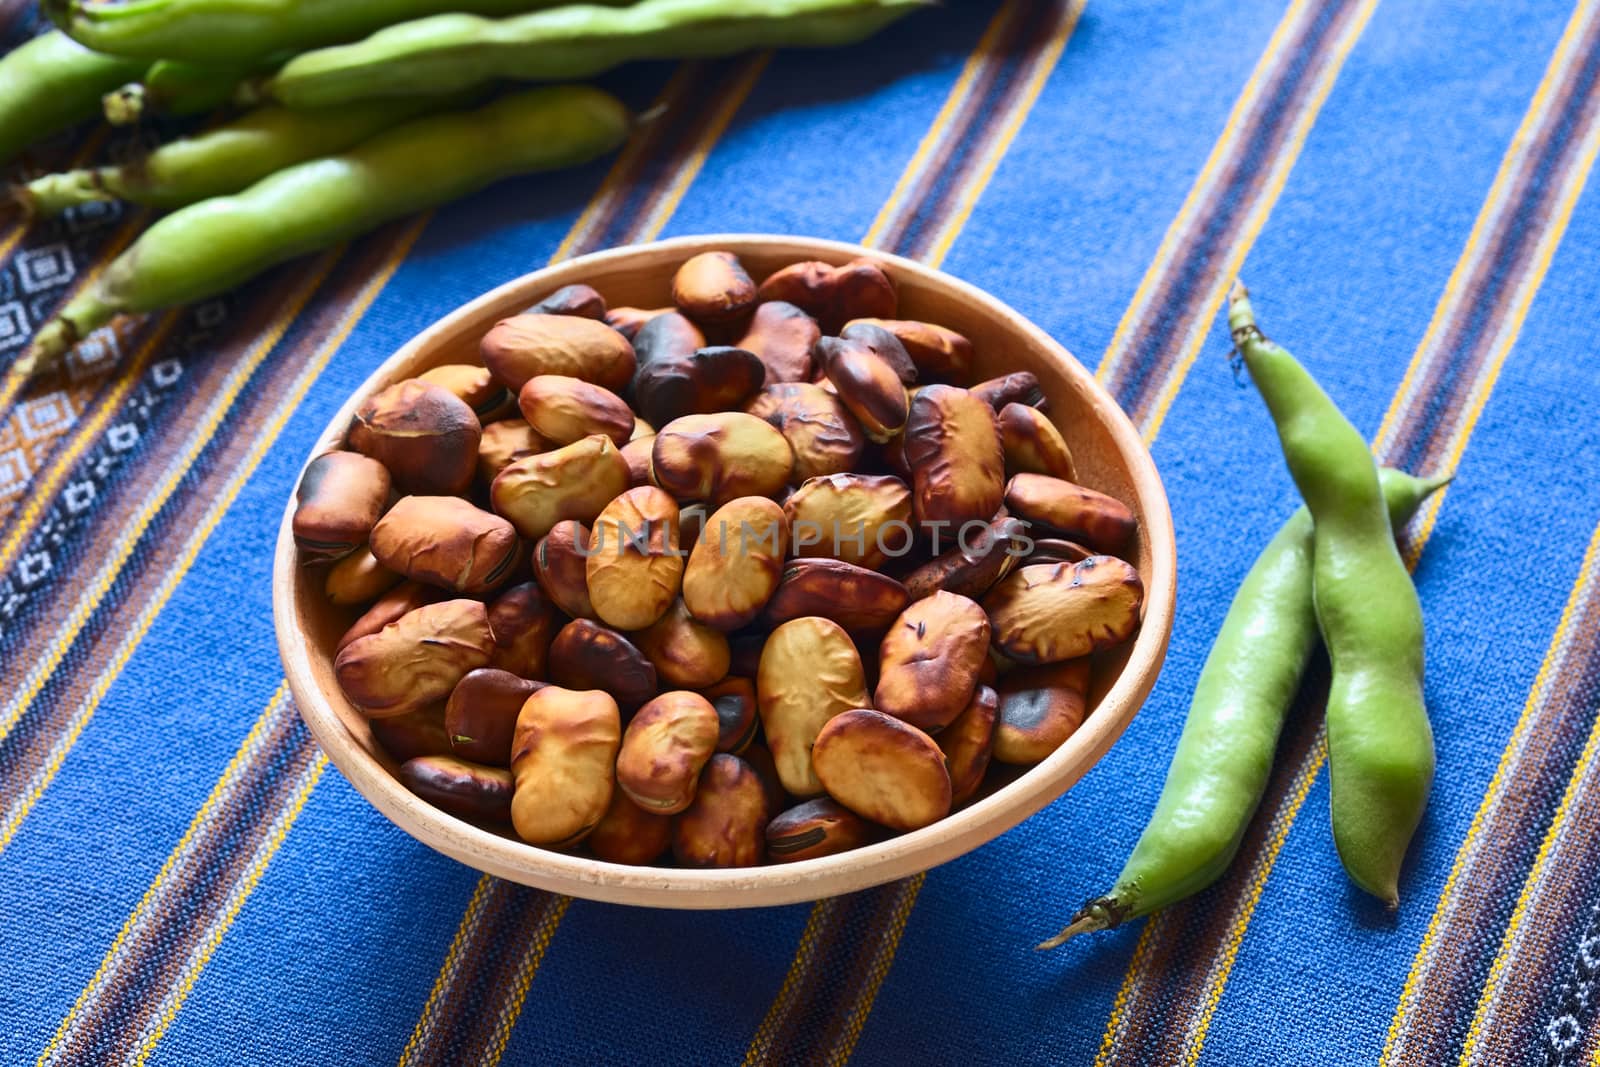 Roasted broad beans (lat. Vicia faba) eaten as snack in Bolivia in bowl with fresh broad bean pods on the side and in the back on blue fabric, photographed with natural light (Selective Focus, Focus in the middle of the roasted beans)